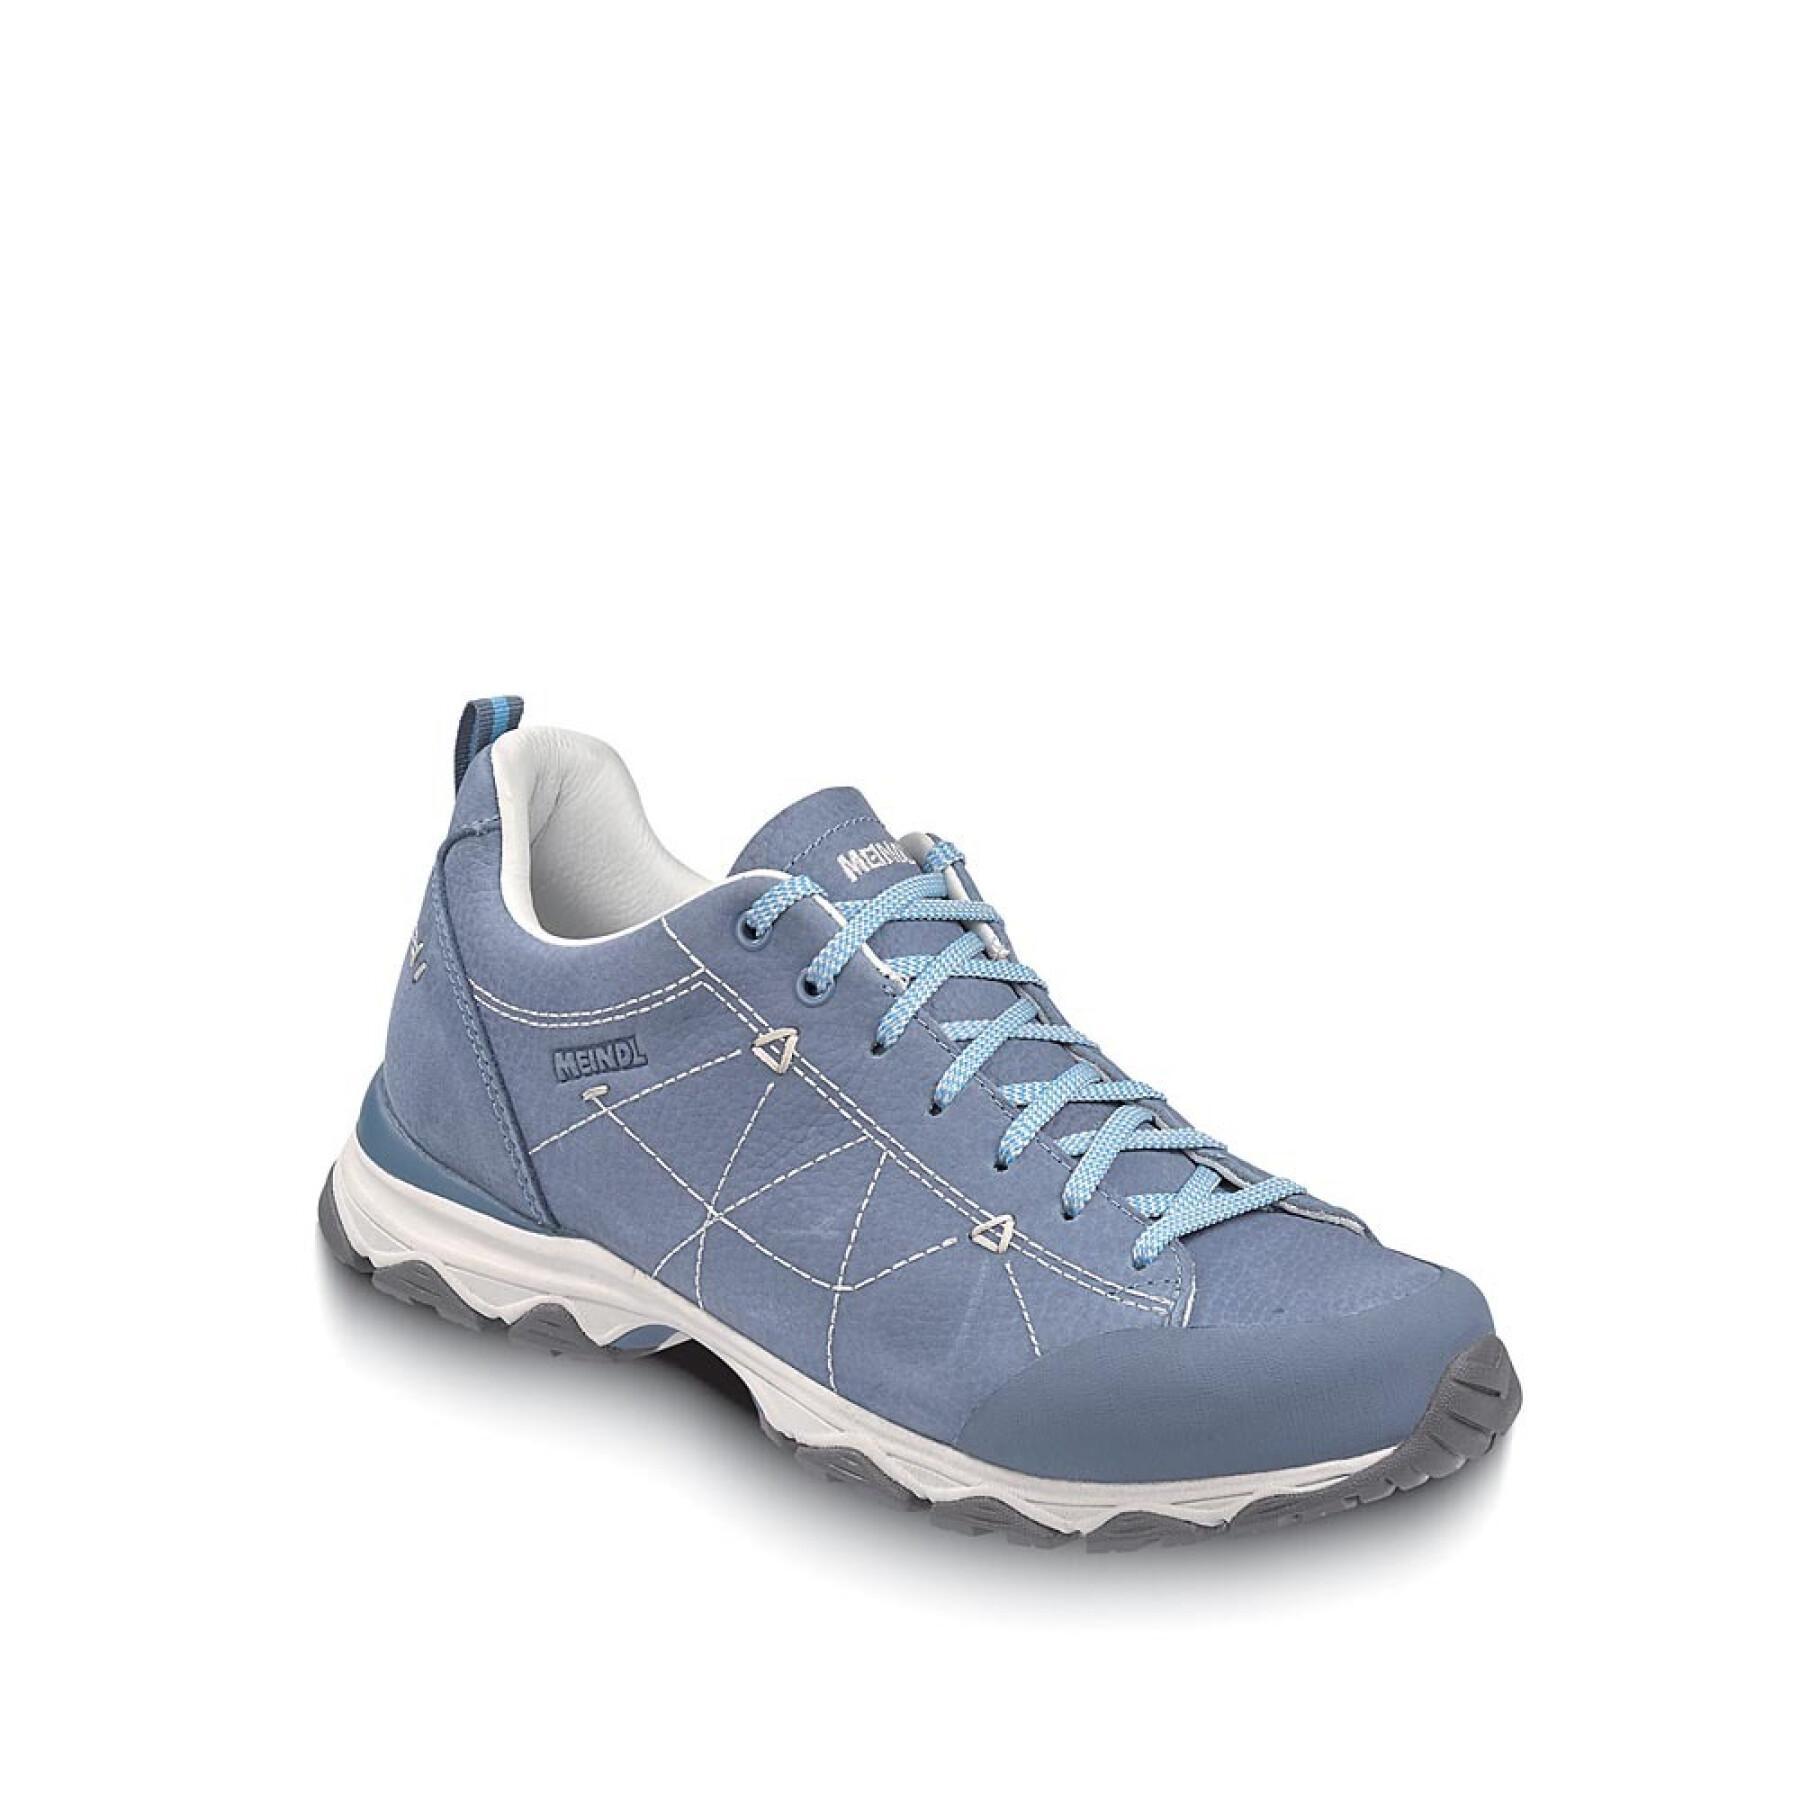 Women's hiking shoes Meindl Matera Lady